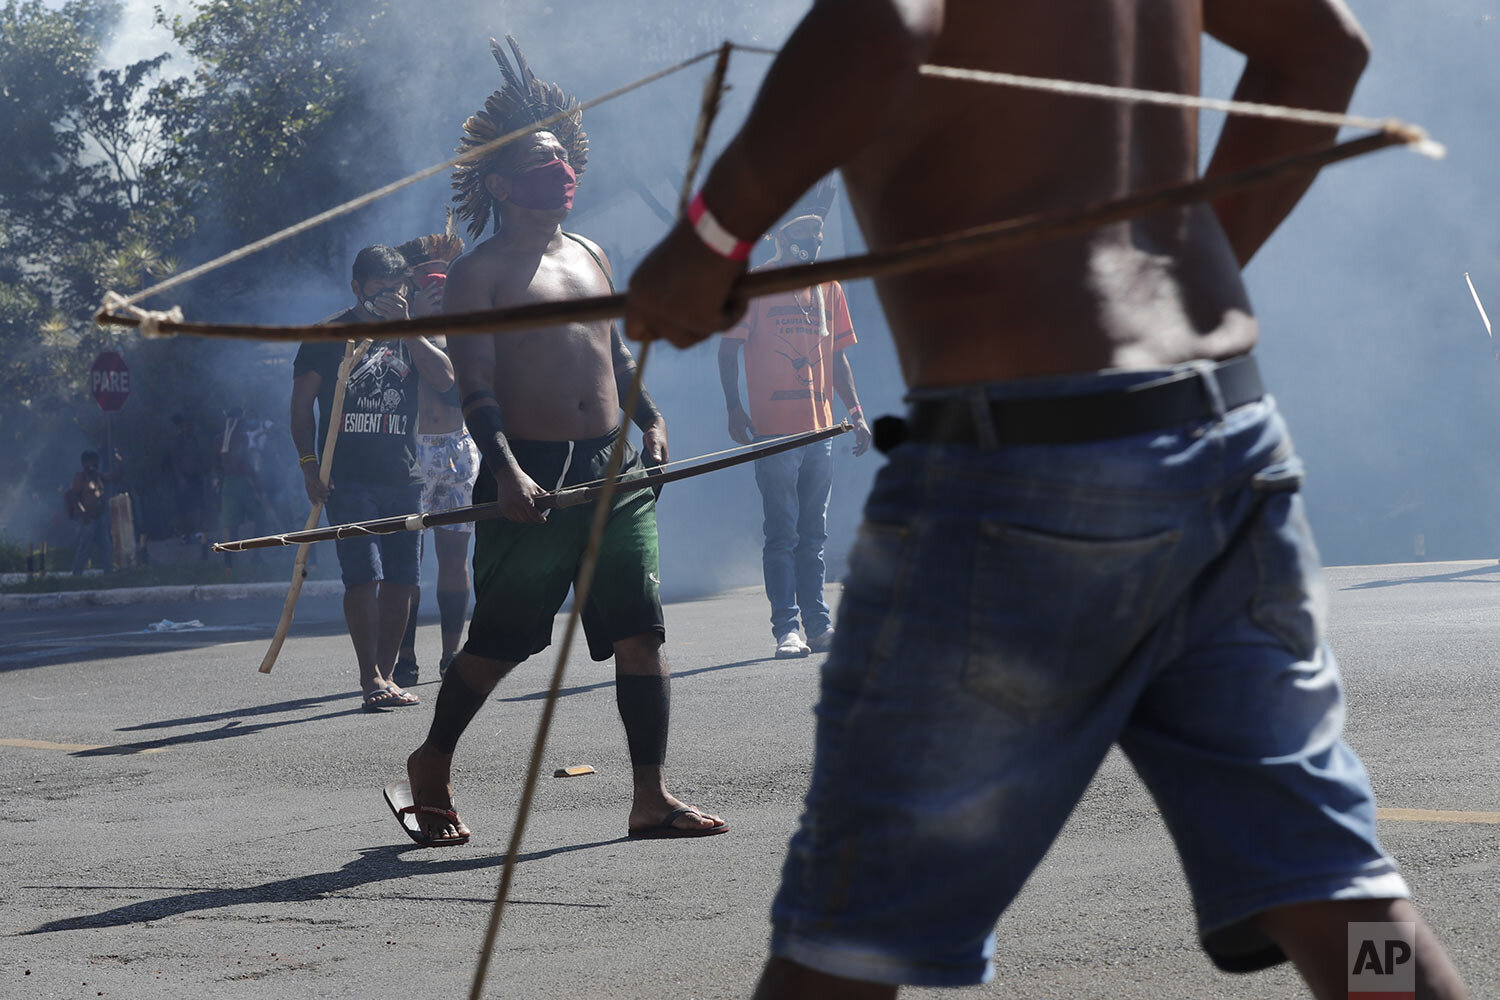  Indigenous men armed with bows and arrows walk amid tear gas fired by police outside Congres where they protest a proposed bill they say would limit recognition of reservation land, in Brasilia, Brazil, June 22, 2021. (AP Photo/Eraldo Peres) 